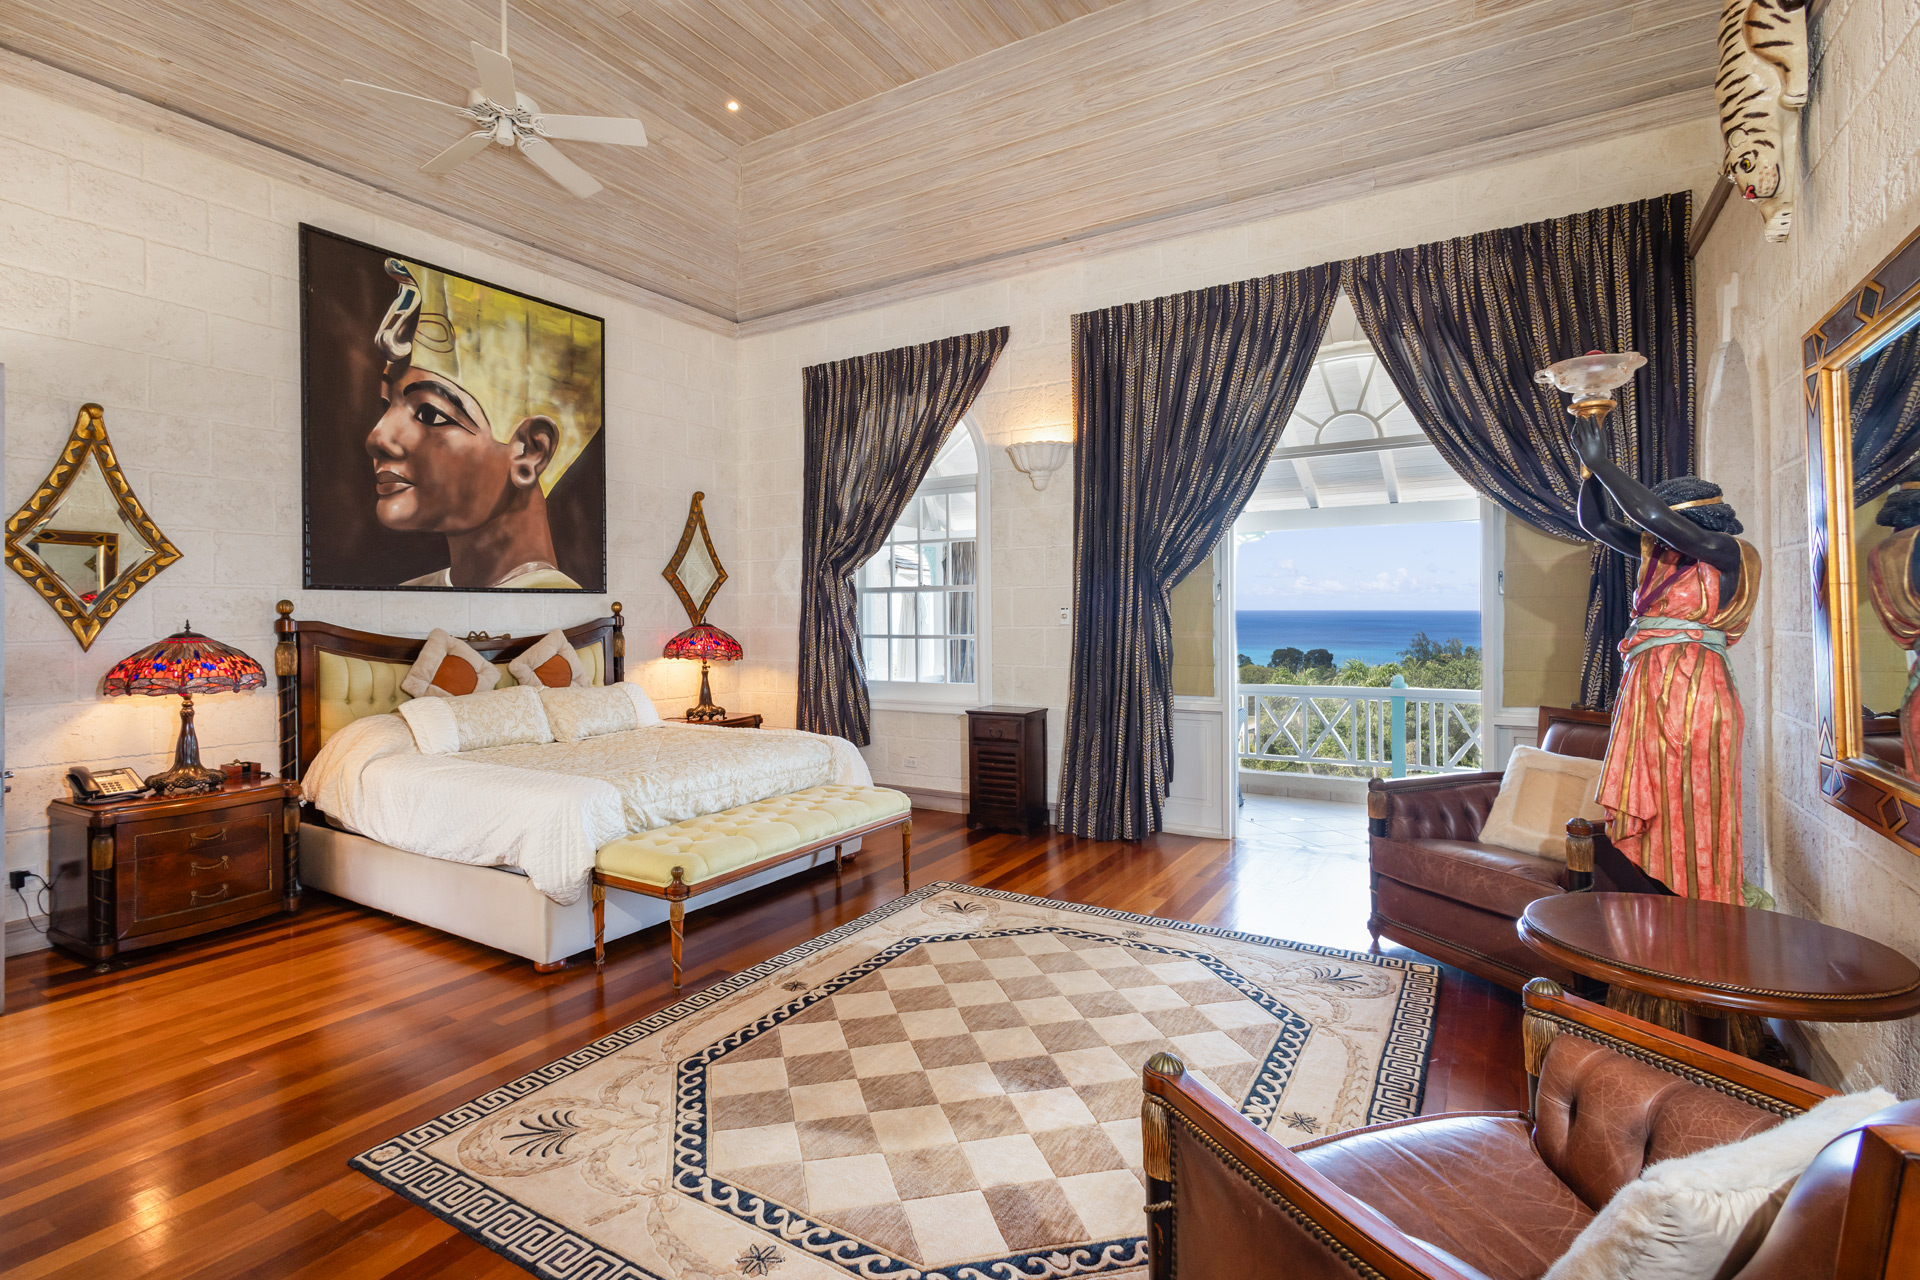 Villa bedroom, with king-size bed, armchair and views of the Caribbean Sea.